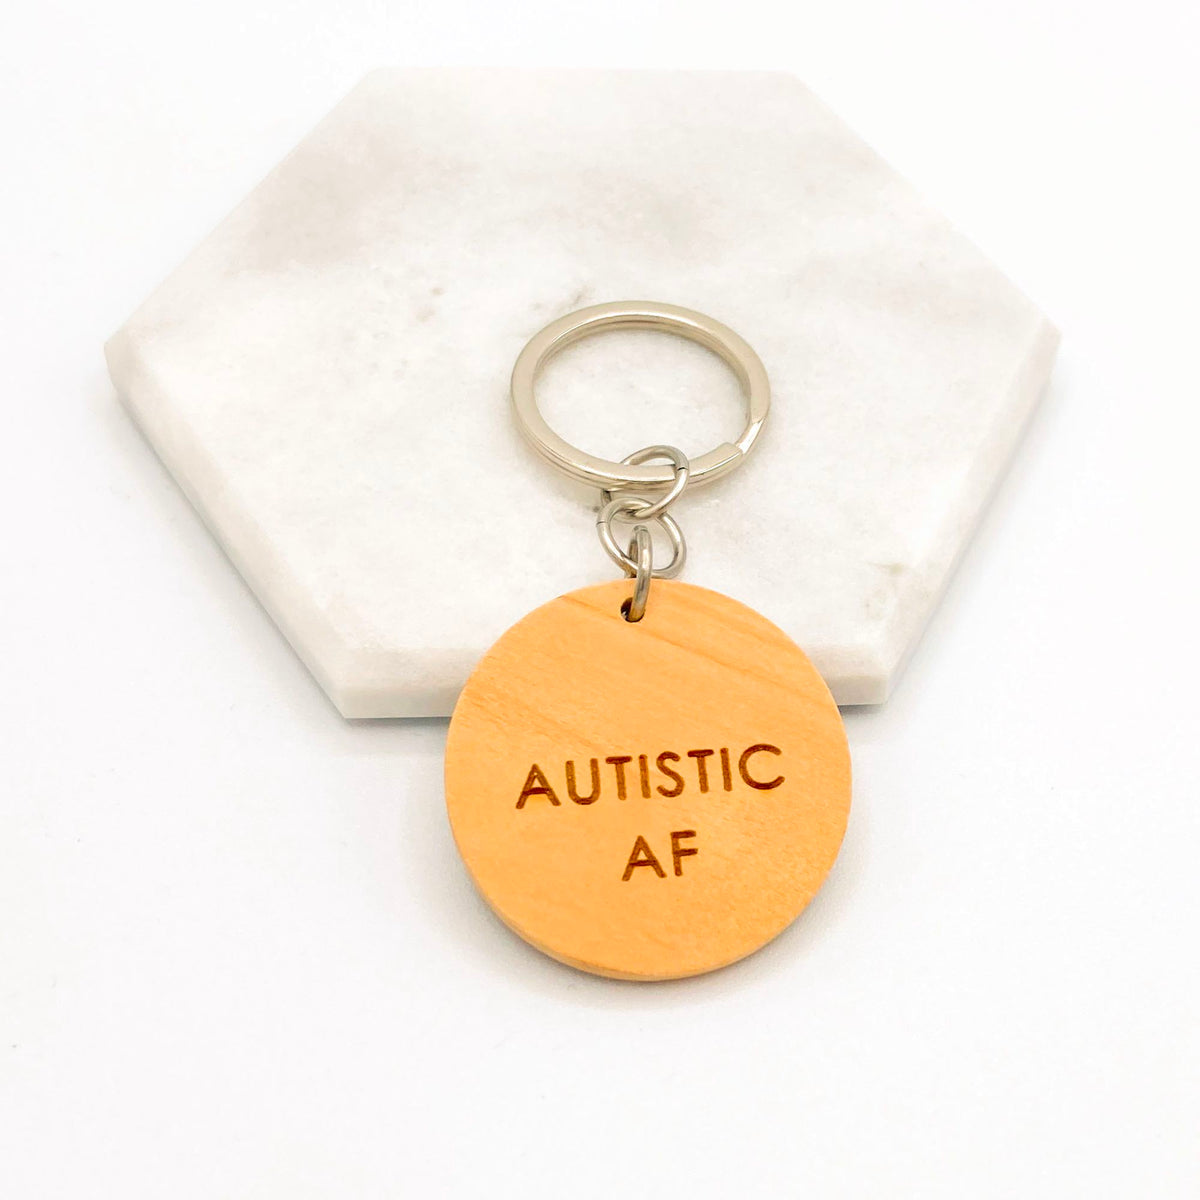 autistic af key chain as fuck uk